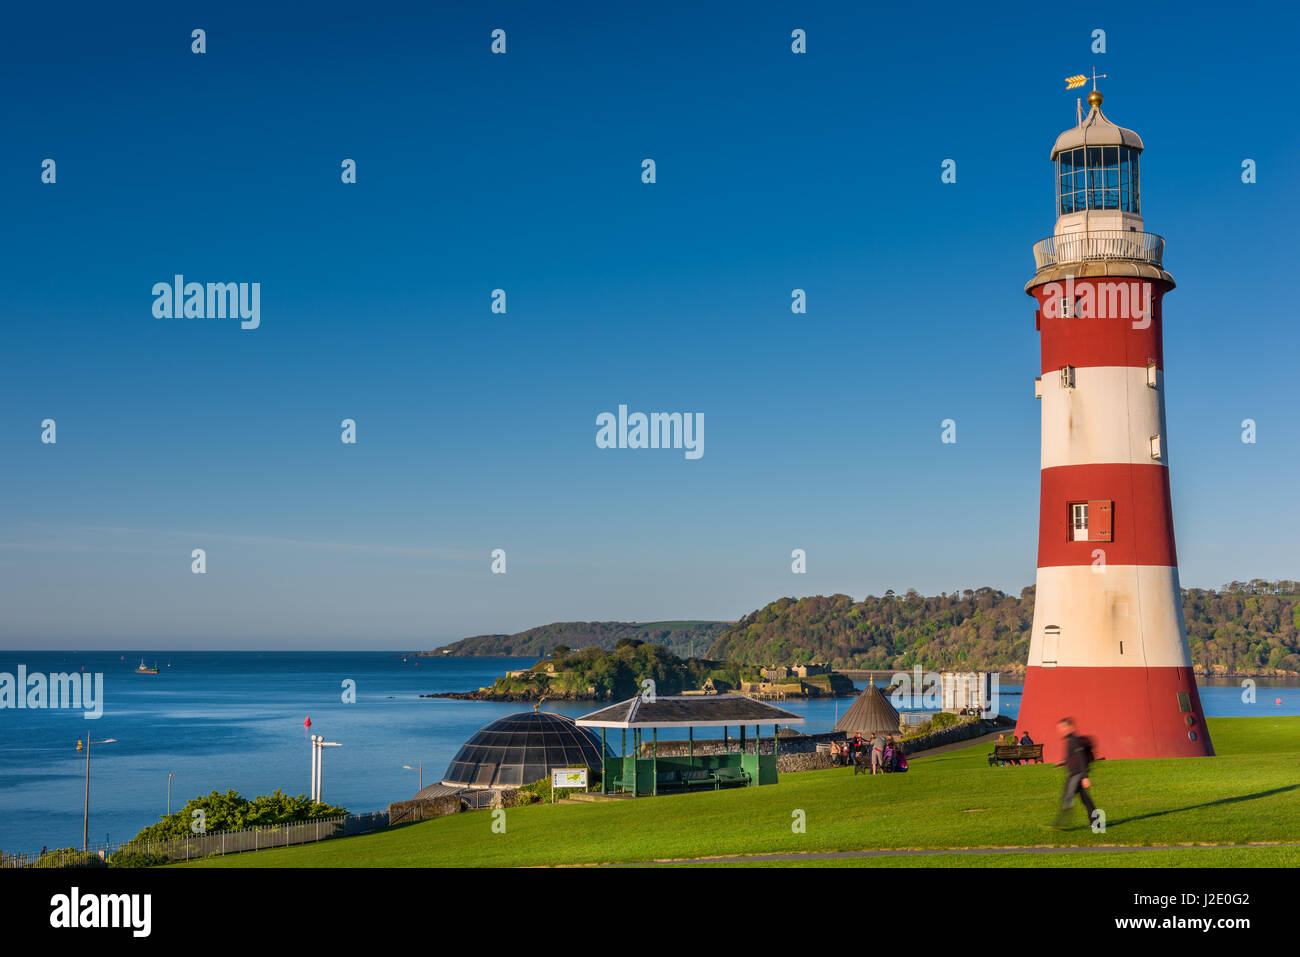 People enjoy the early morning sunshine near Smeatons Tower on Plymouth Hoe in south Devon. Stock Photo